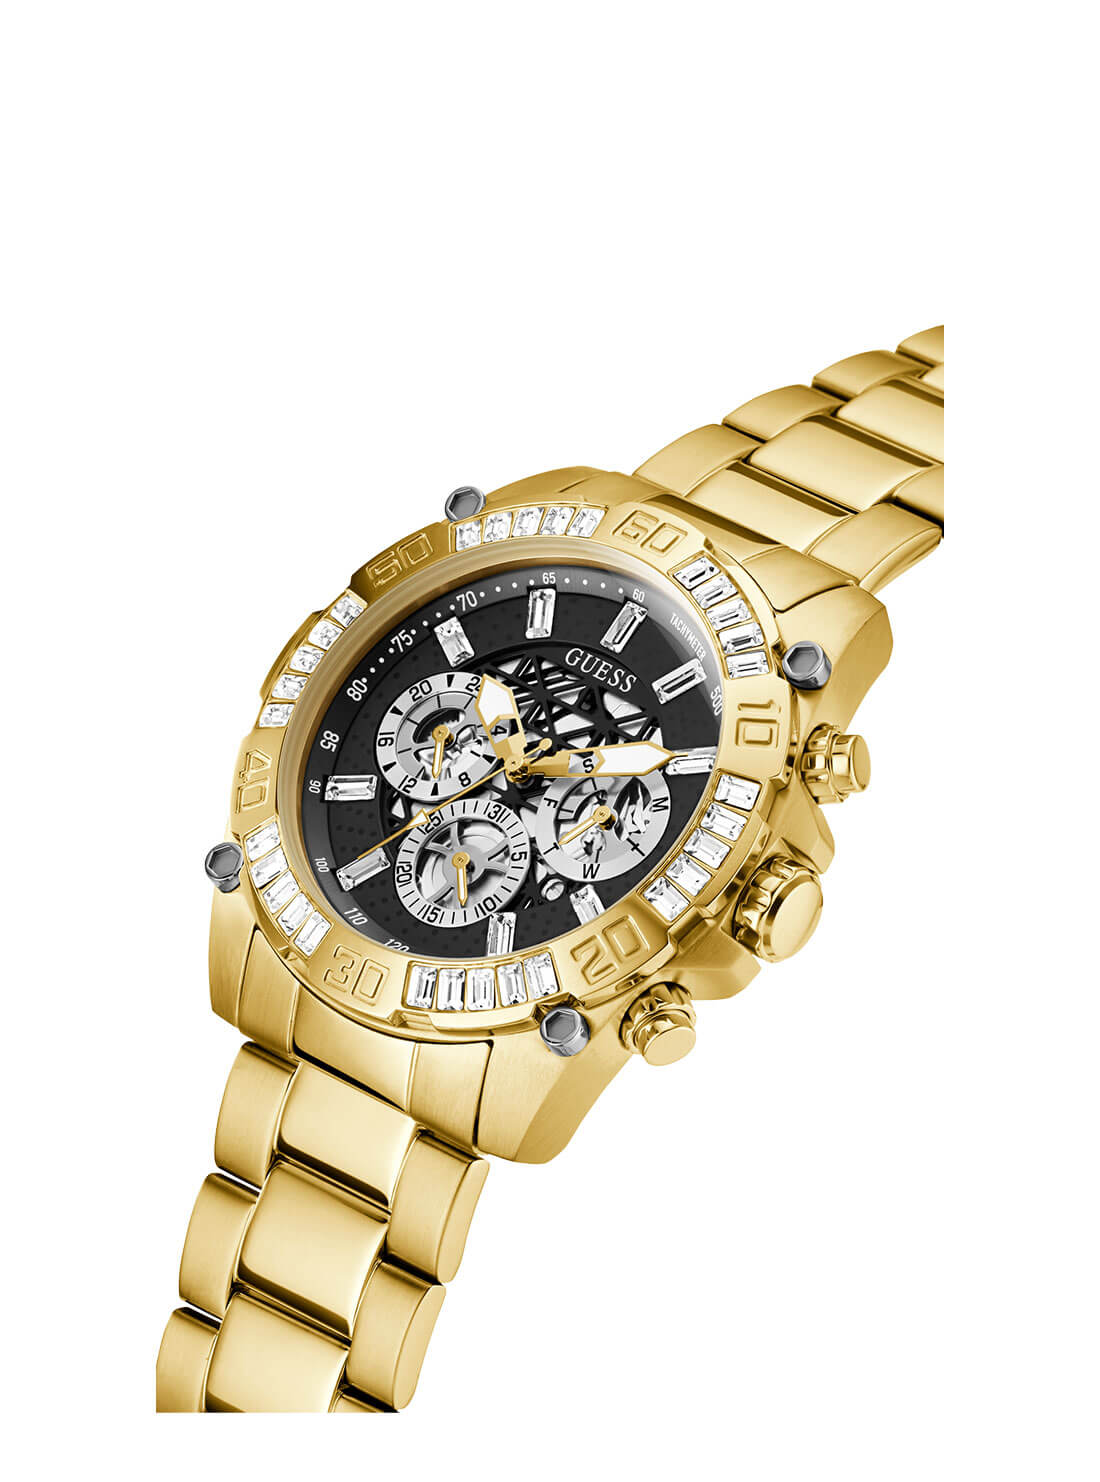 GUESS Mens Gold Trophy Watch GW0390G2 Side Angle View